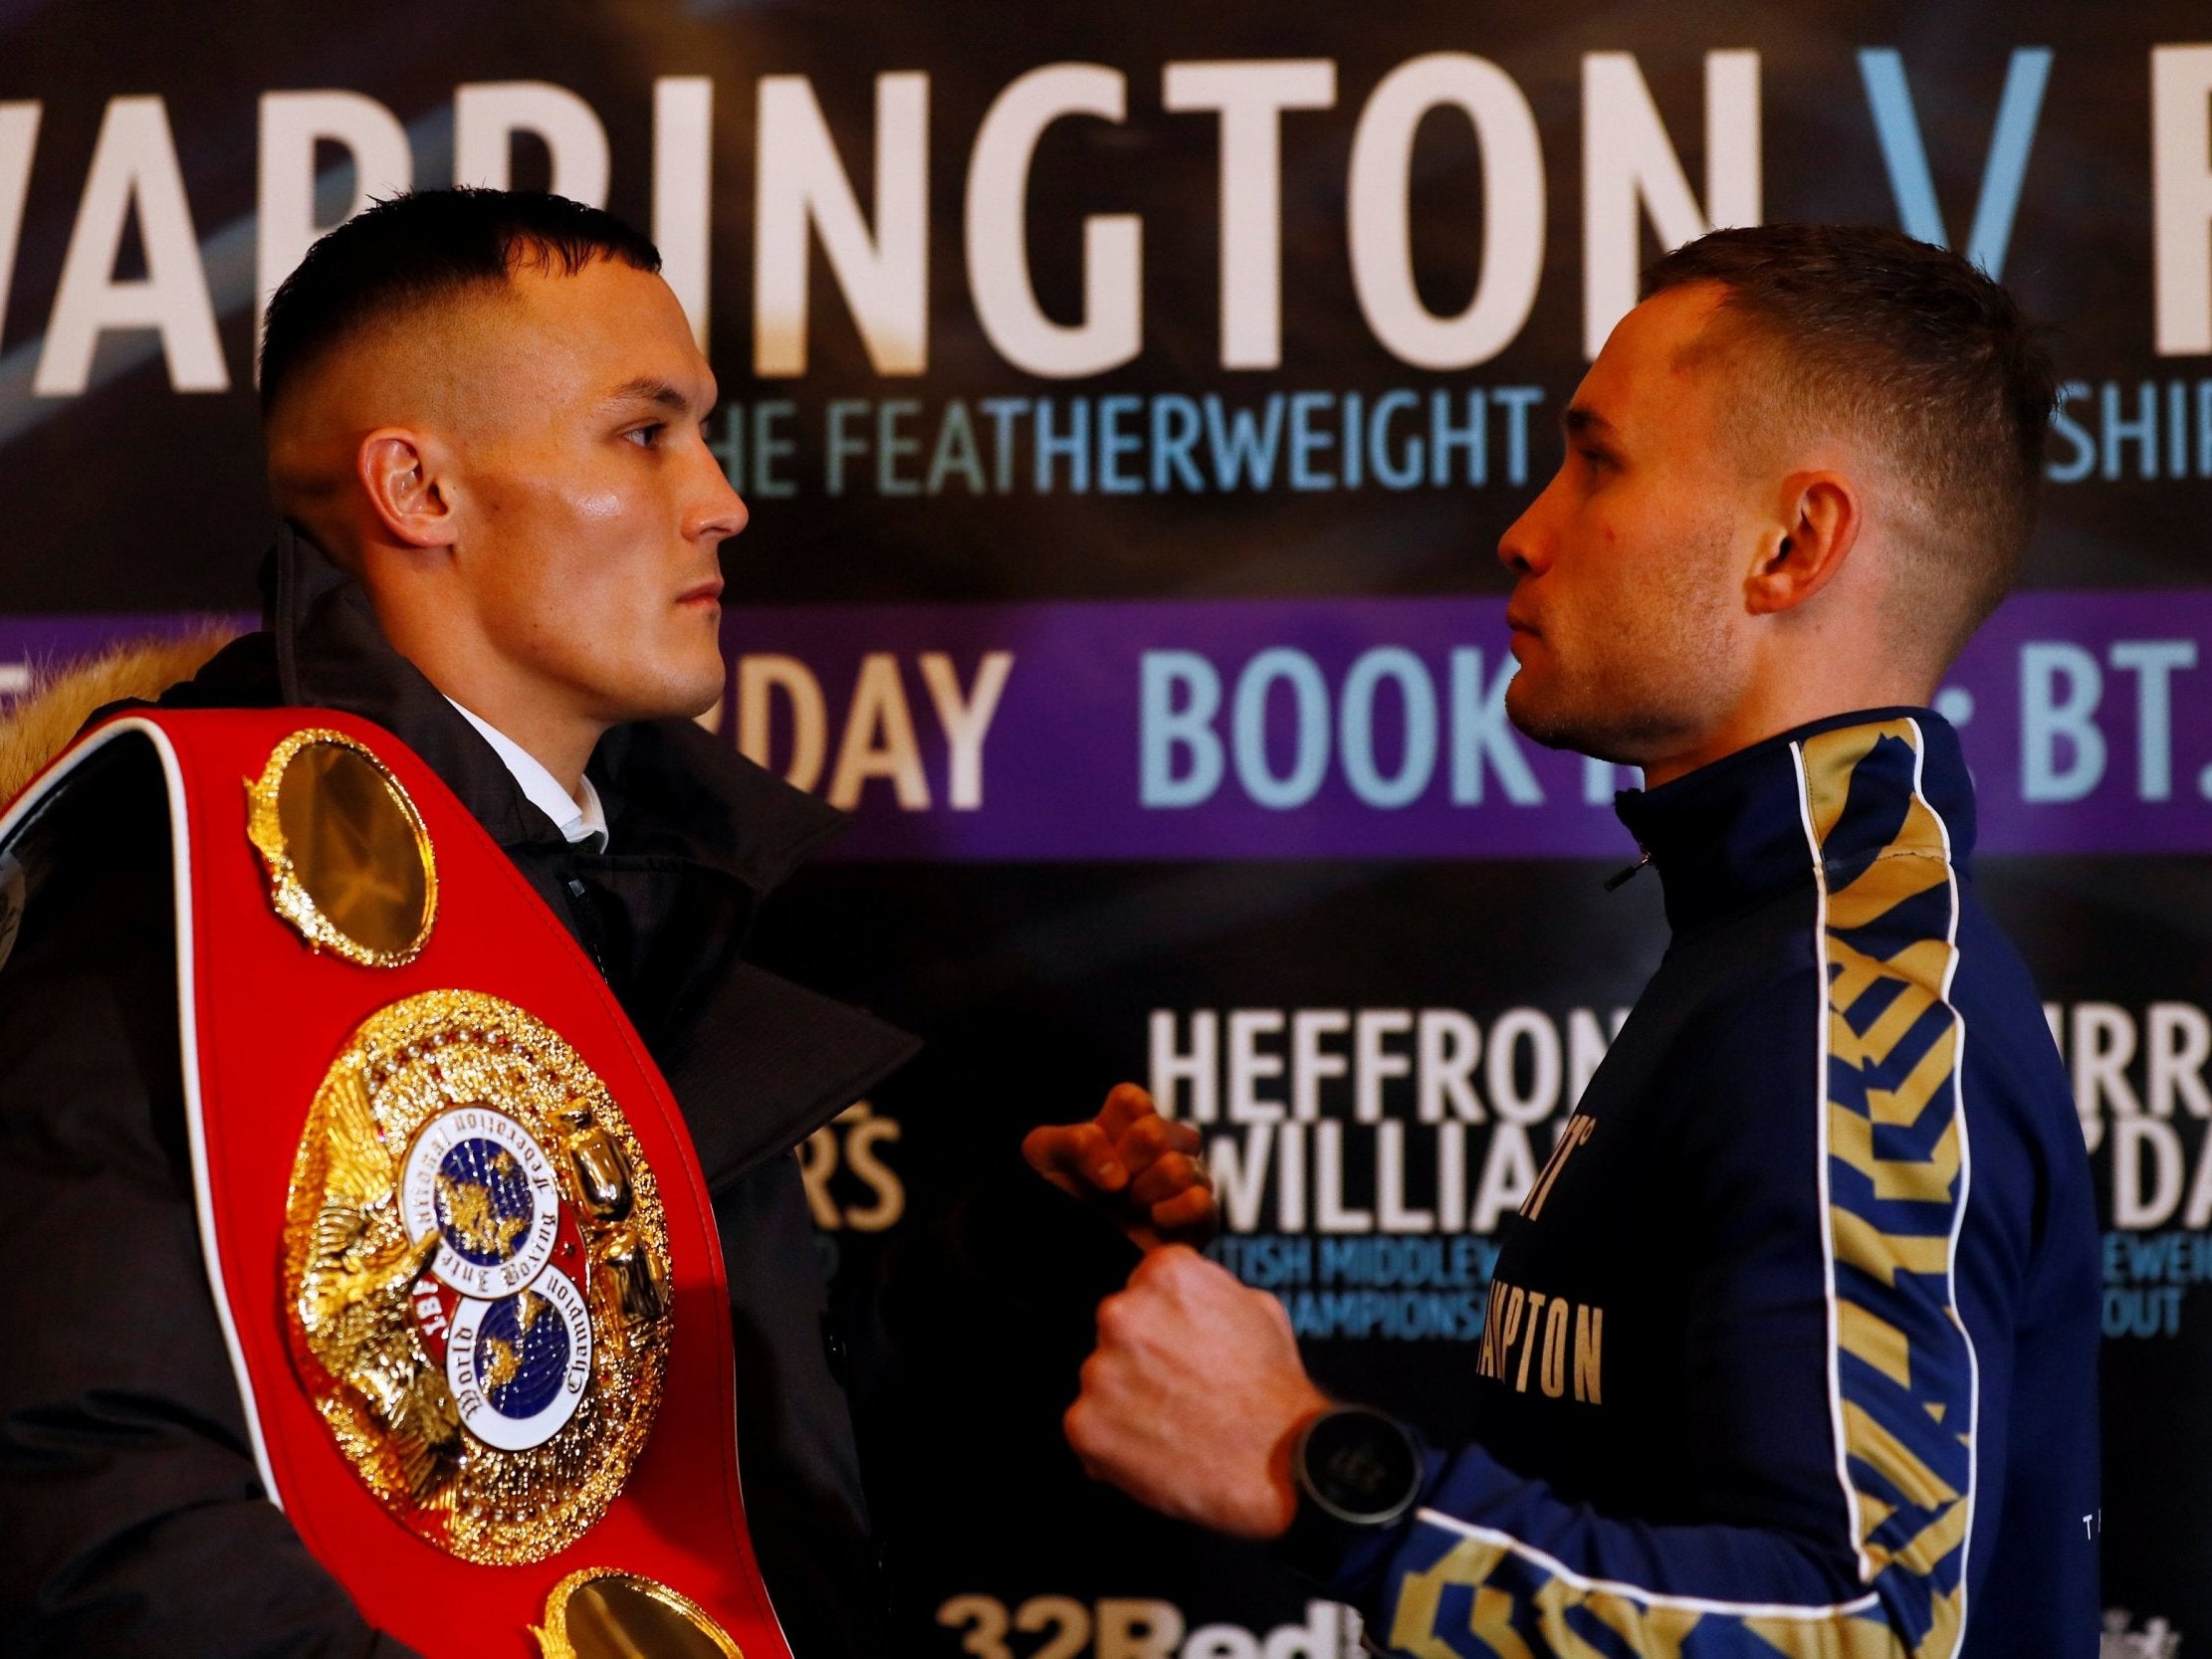 Josh Warrington and Carl Frampton go head to head after the press conference